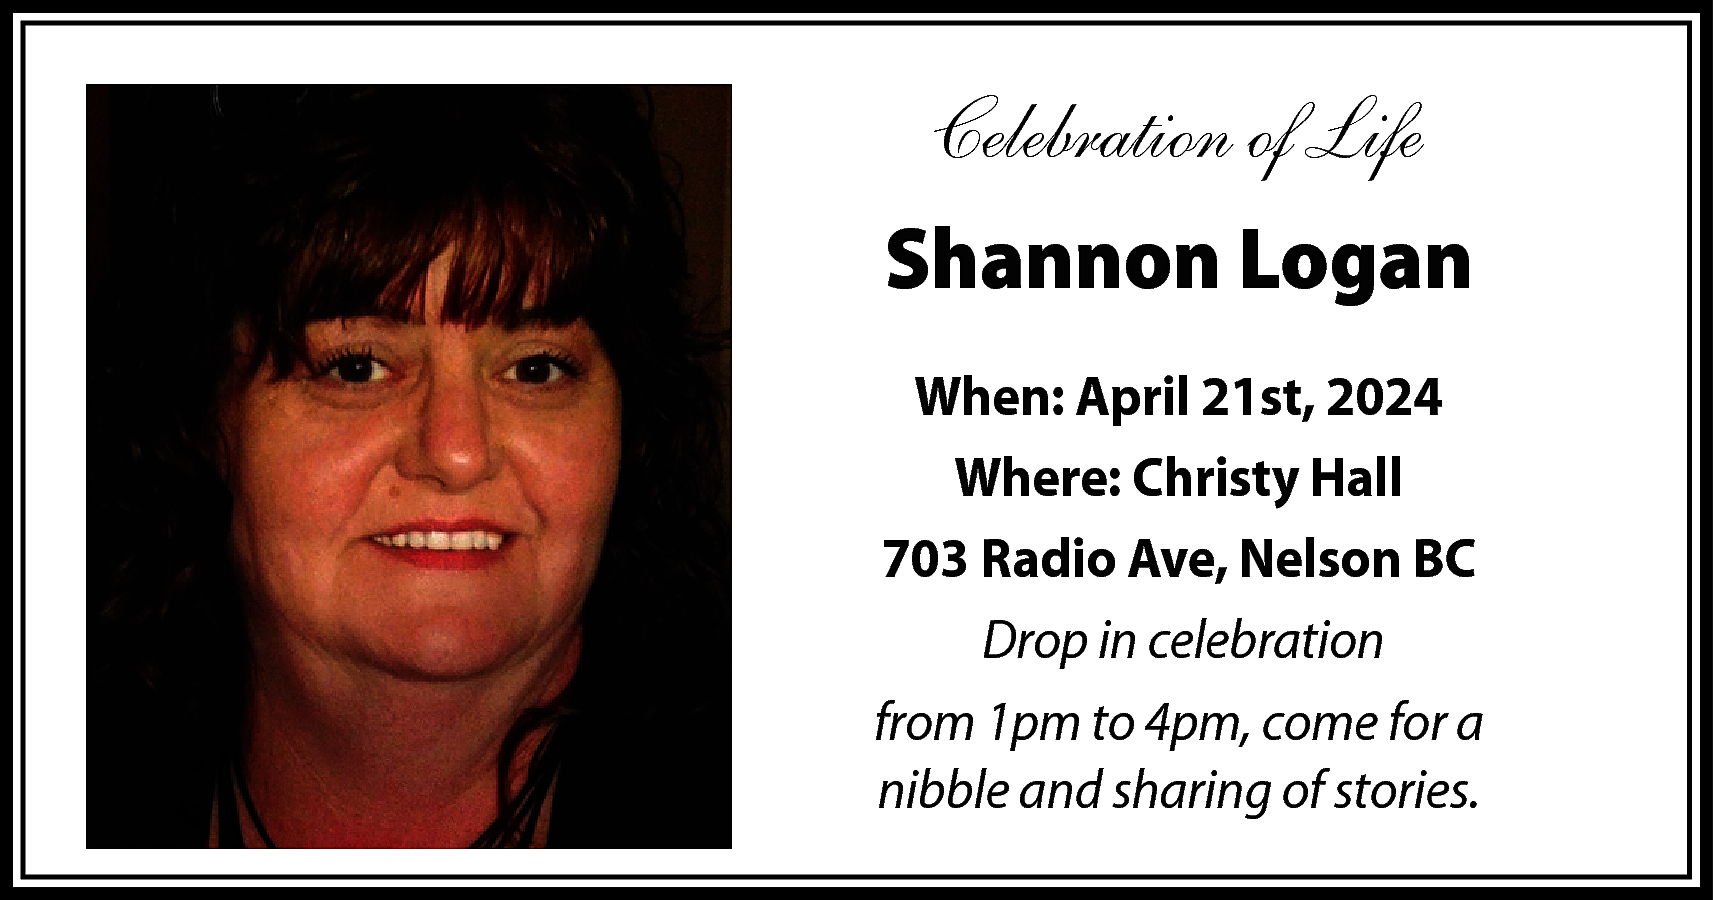 Celebration of Life <br>Shannon Logan  Celebration of Life  Shannon Logan  When: April 21st, 2024  Where: Christy Hall  703 Radio Ave, Nelson BC  Drop in celebration  from 1pm to 4pm, come for a  nibble and sharing of stories.    